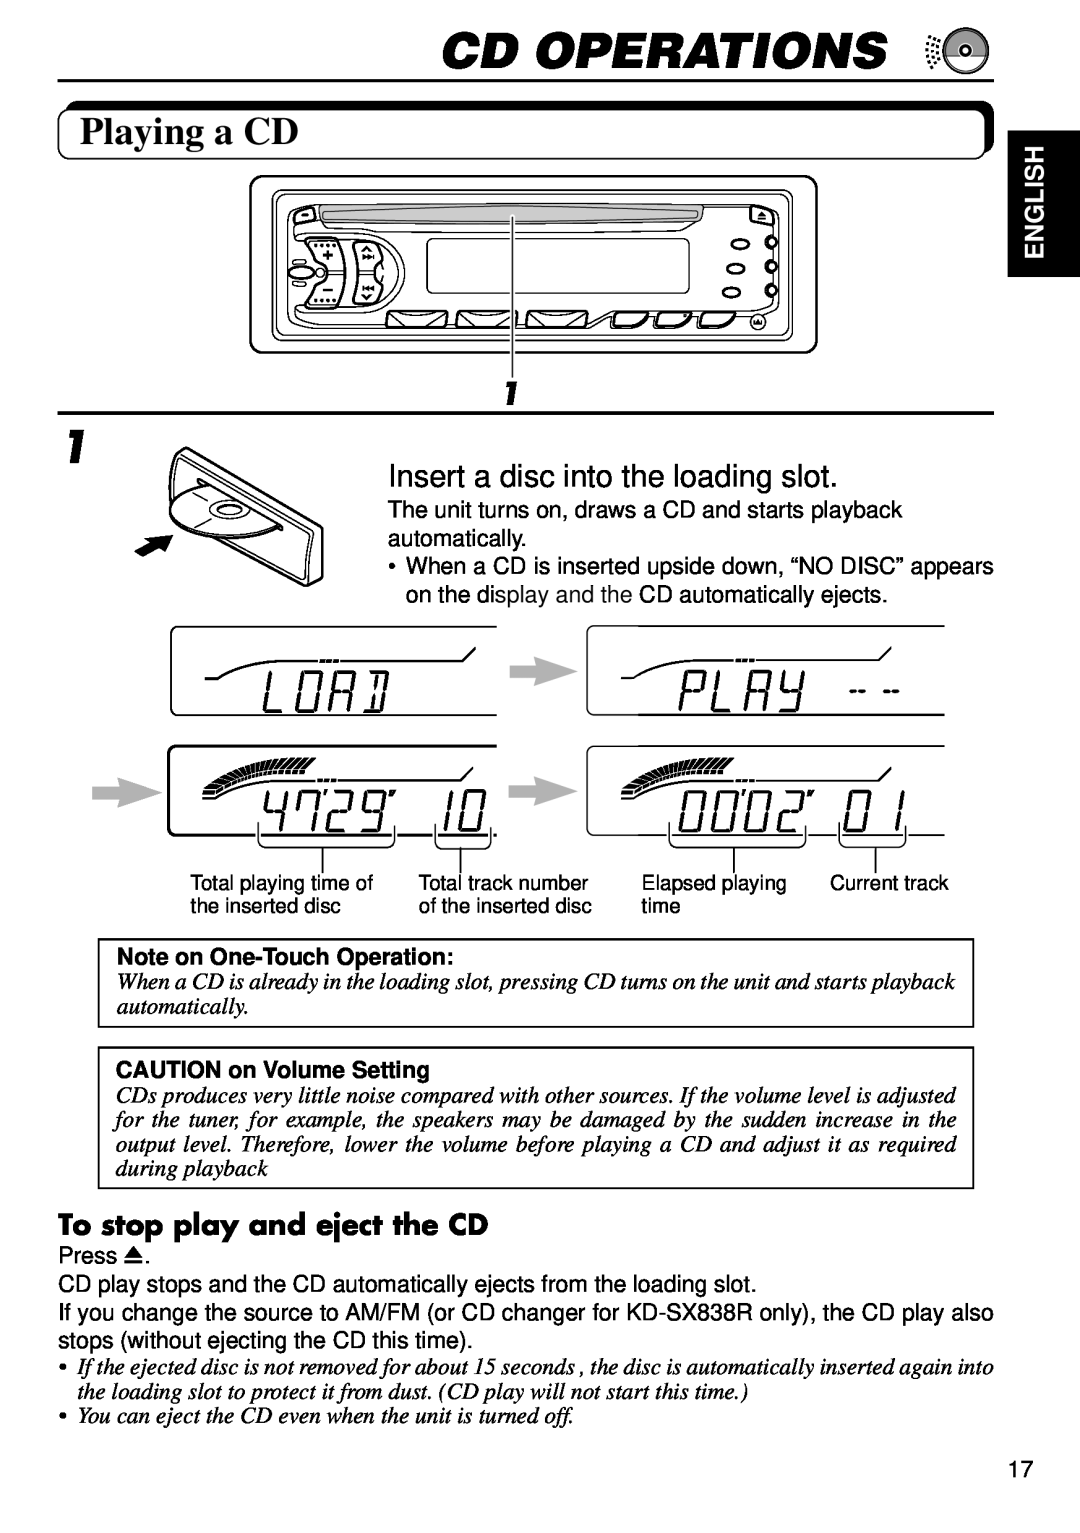 JVC KD-S707R Cd Operations, Playing a CD, Insert a disc into the loading slot, To stop play and eject the CD, English 